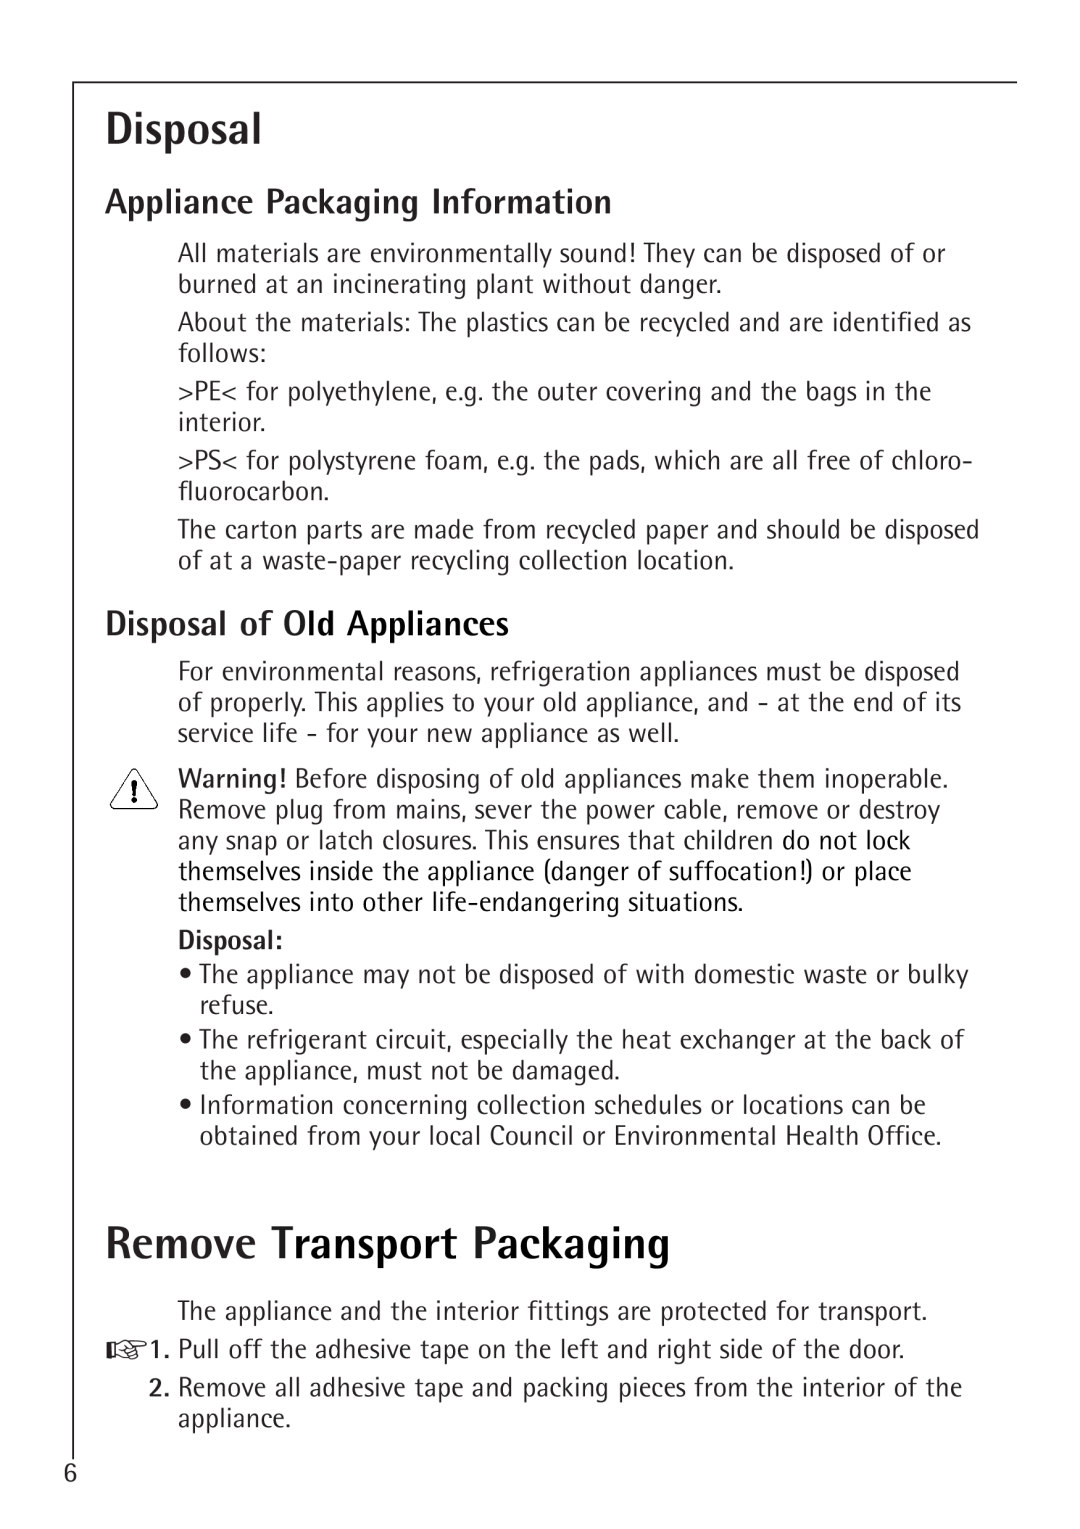 Electrolux K 98840-4 i manual Remove Transport Packaging, Appliance Packaging Information, Disposal of Old Appliances 